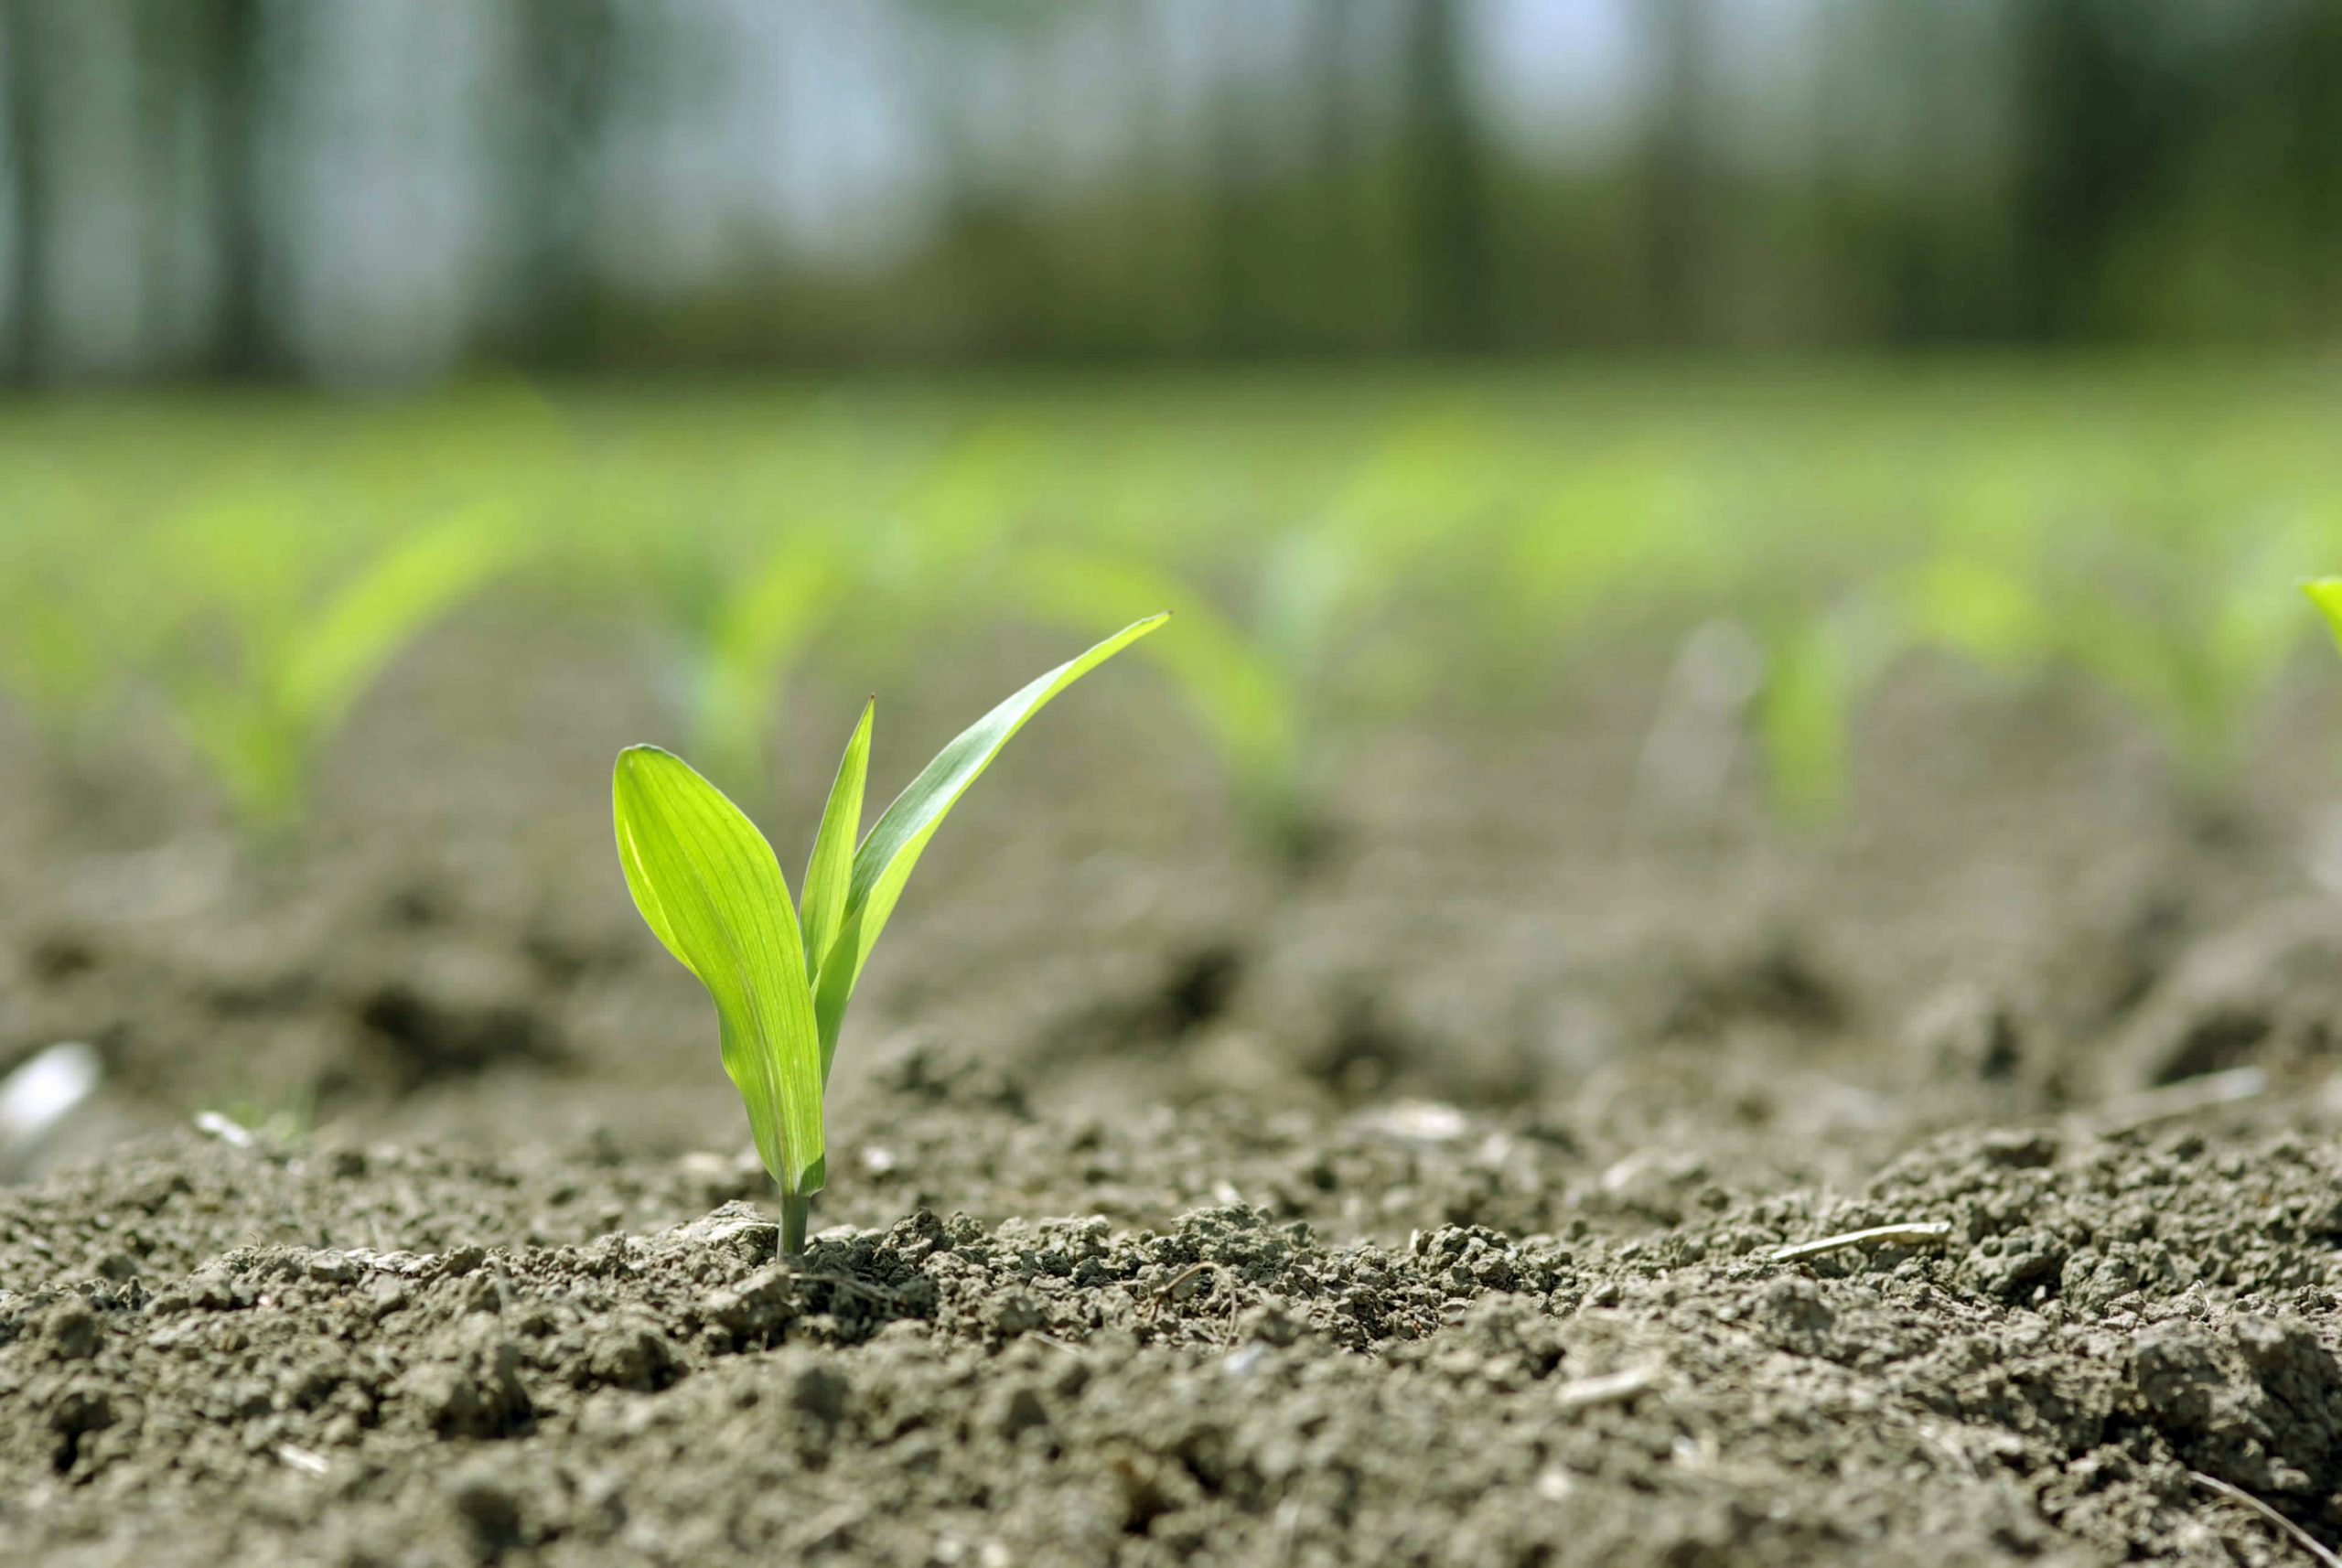 Alltech launches natural fertiliser in India. Photo: Dreamstime